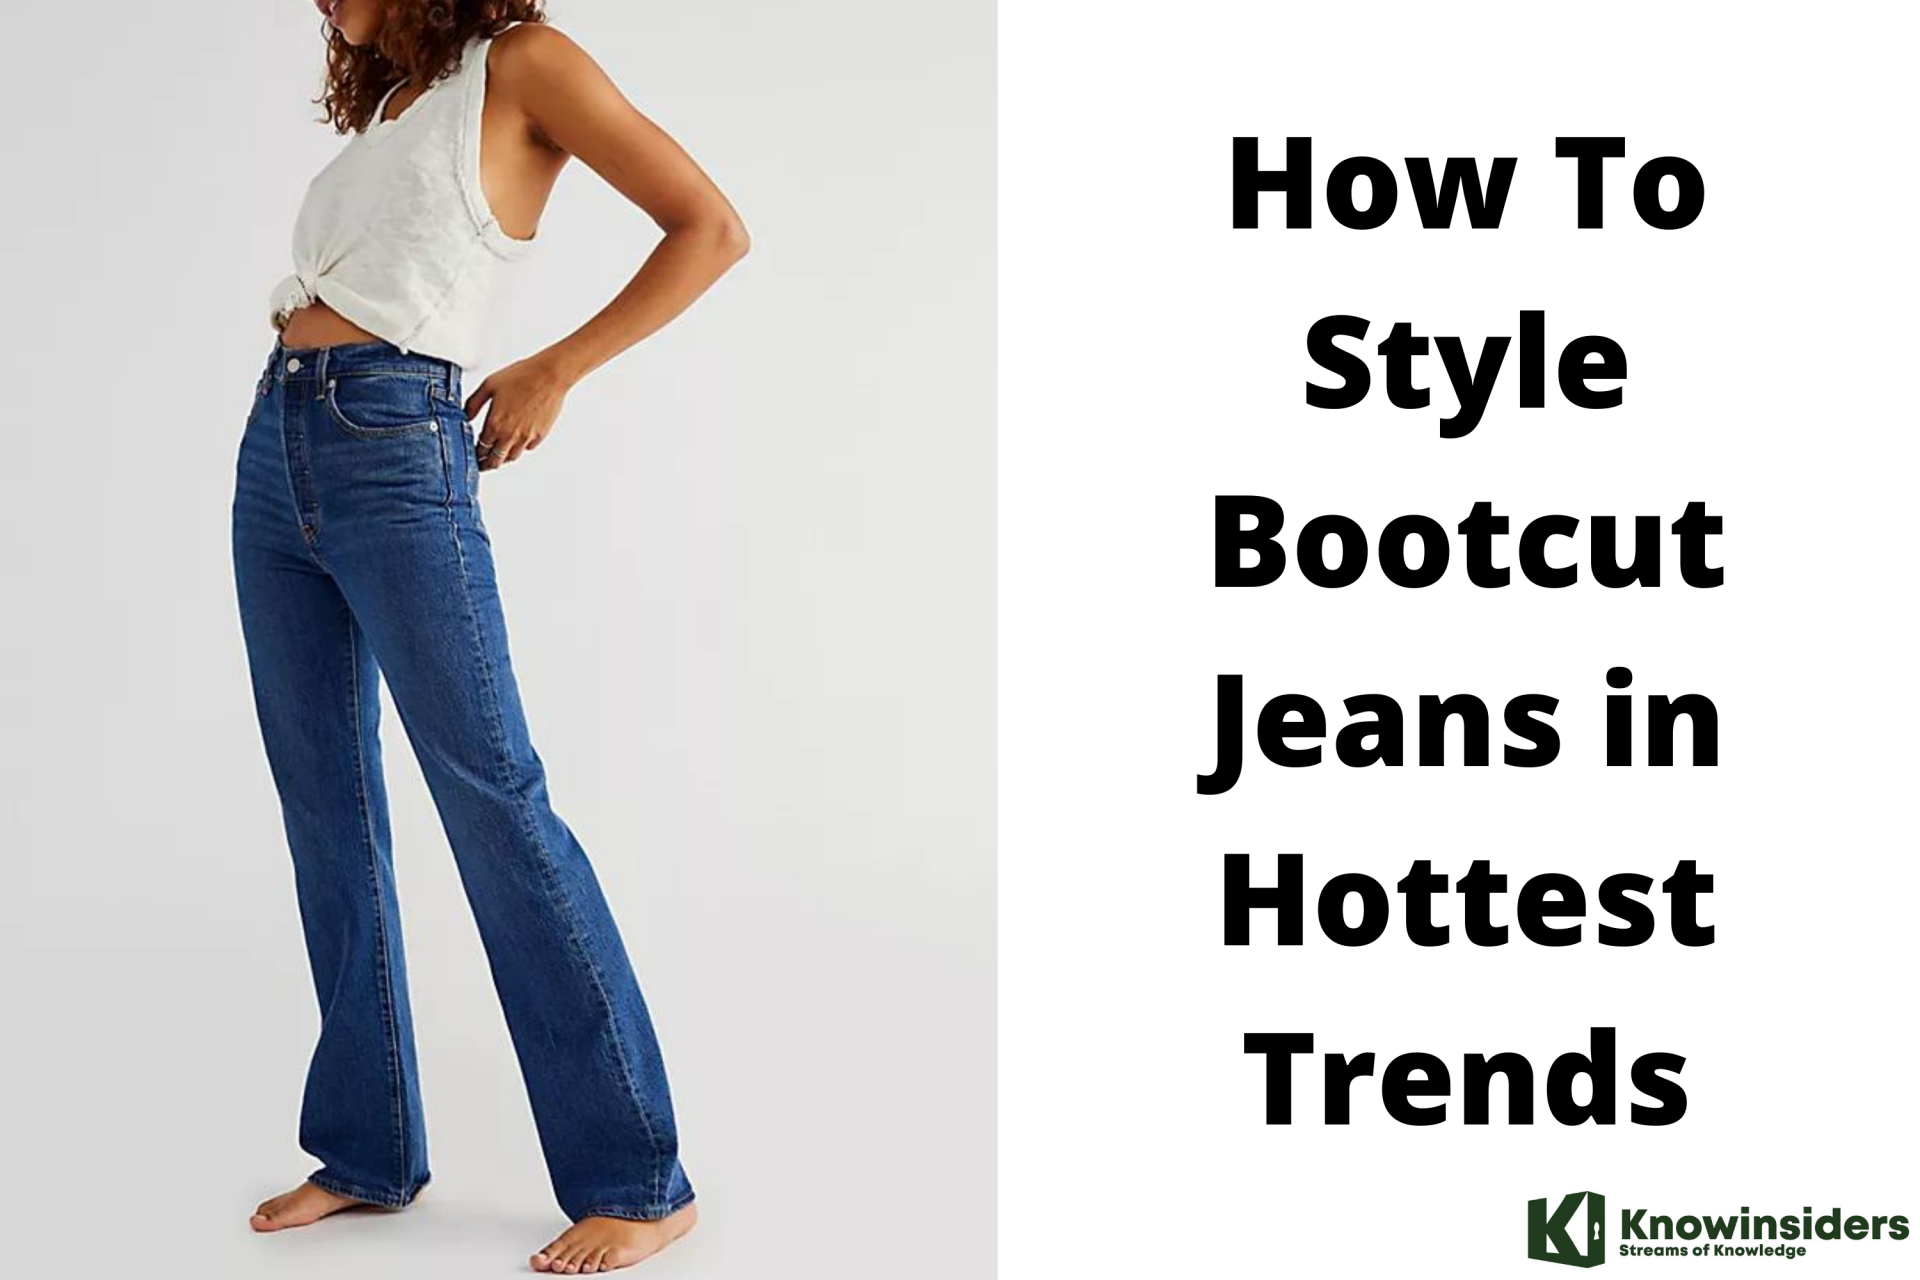 How To Style Bootcut Jeans in Hottest Trends